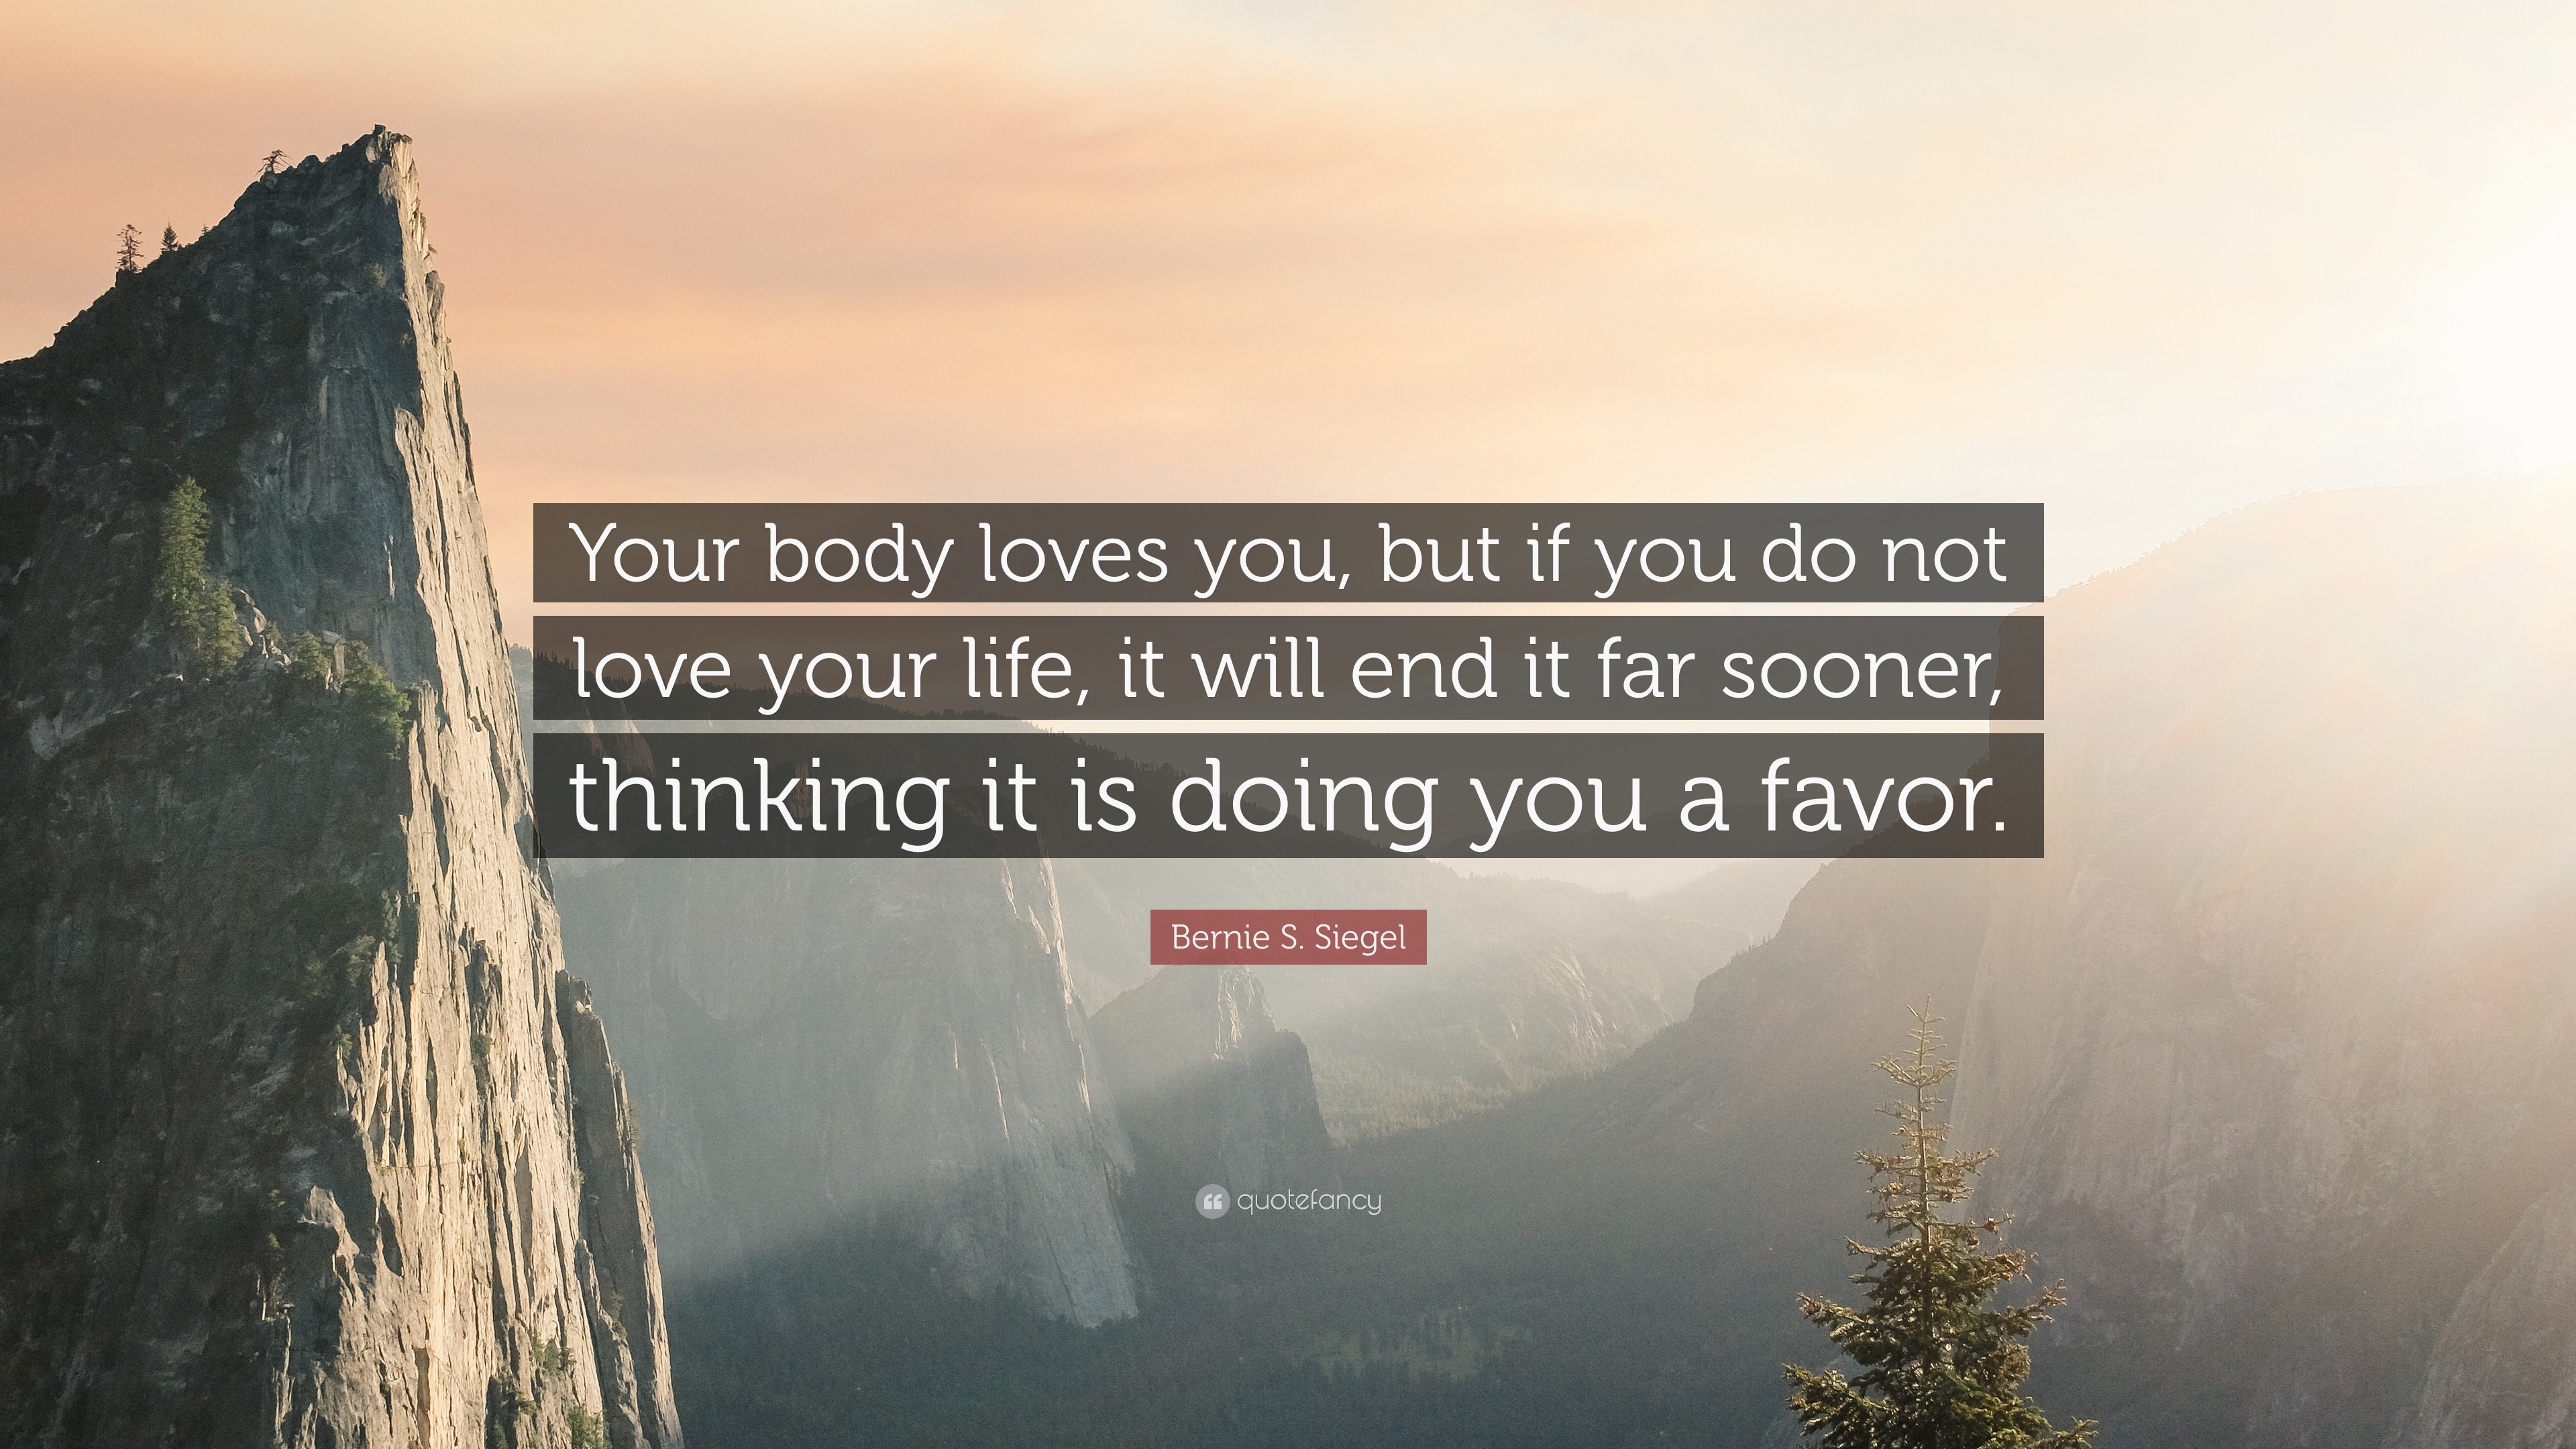 Bernie S Siegel Quote Your Body Loves You But If You Do Not Love Your Life